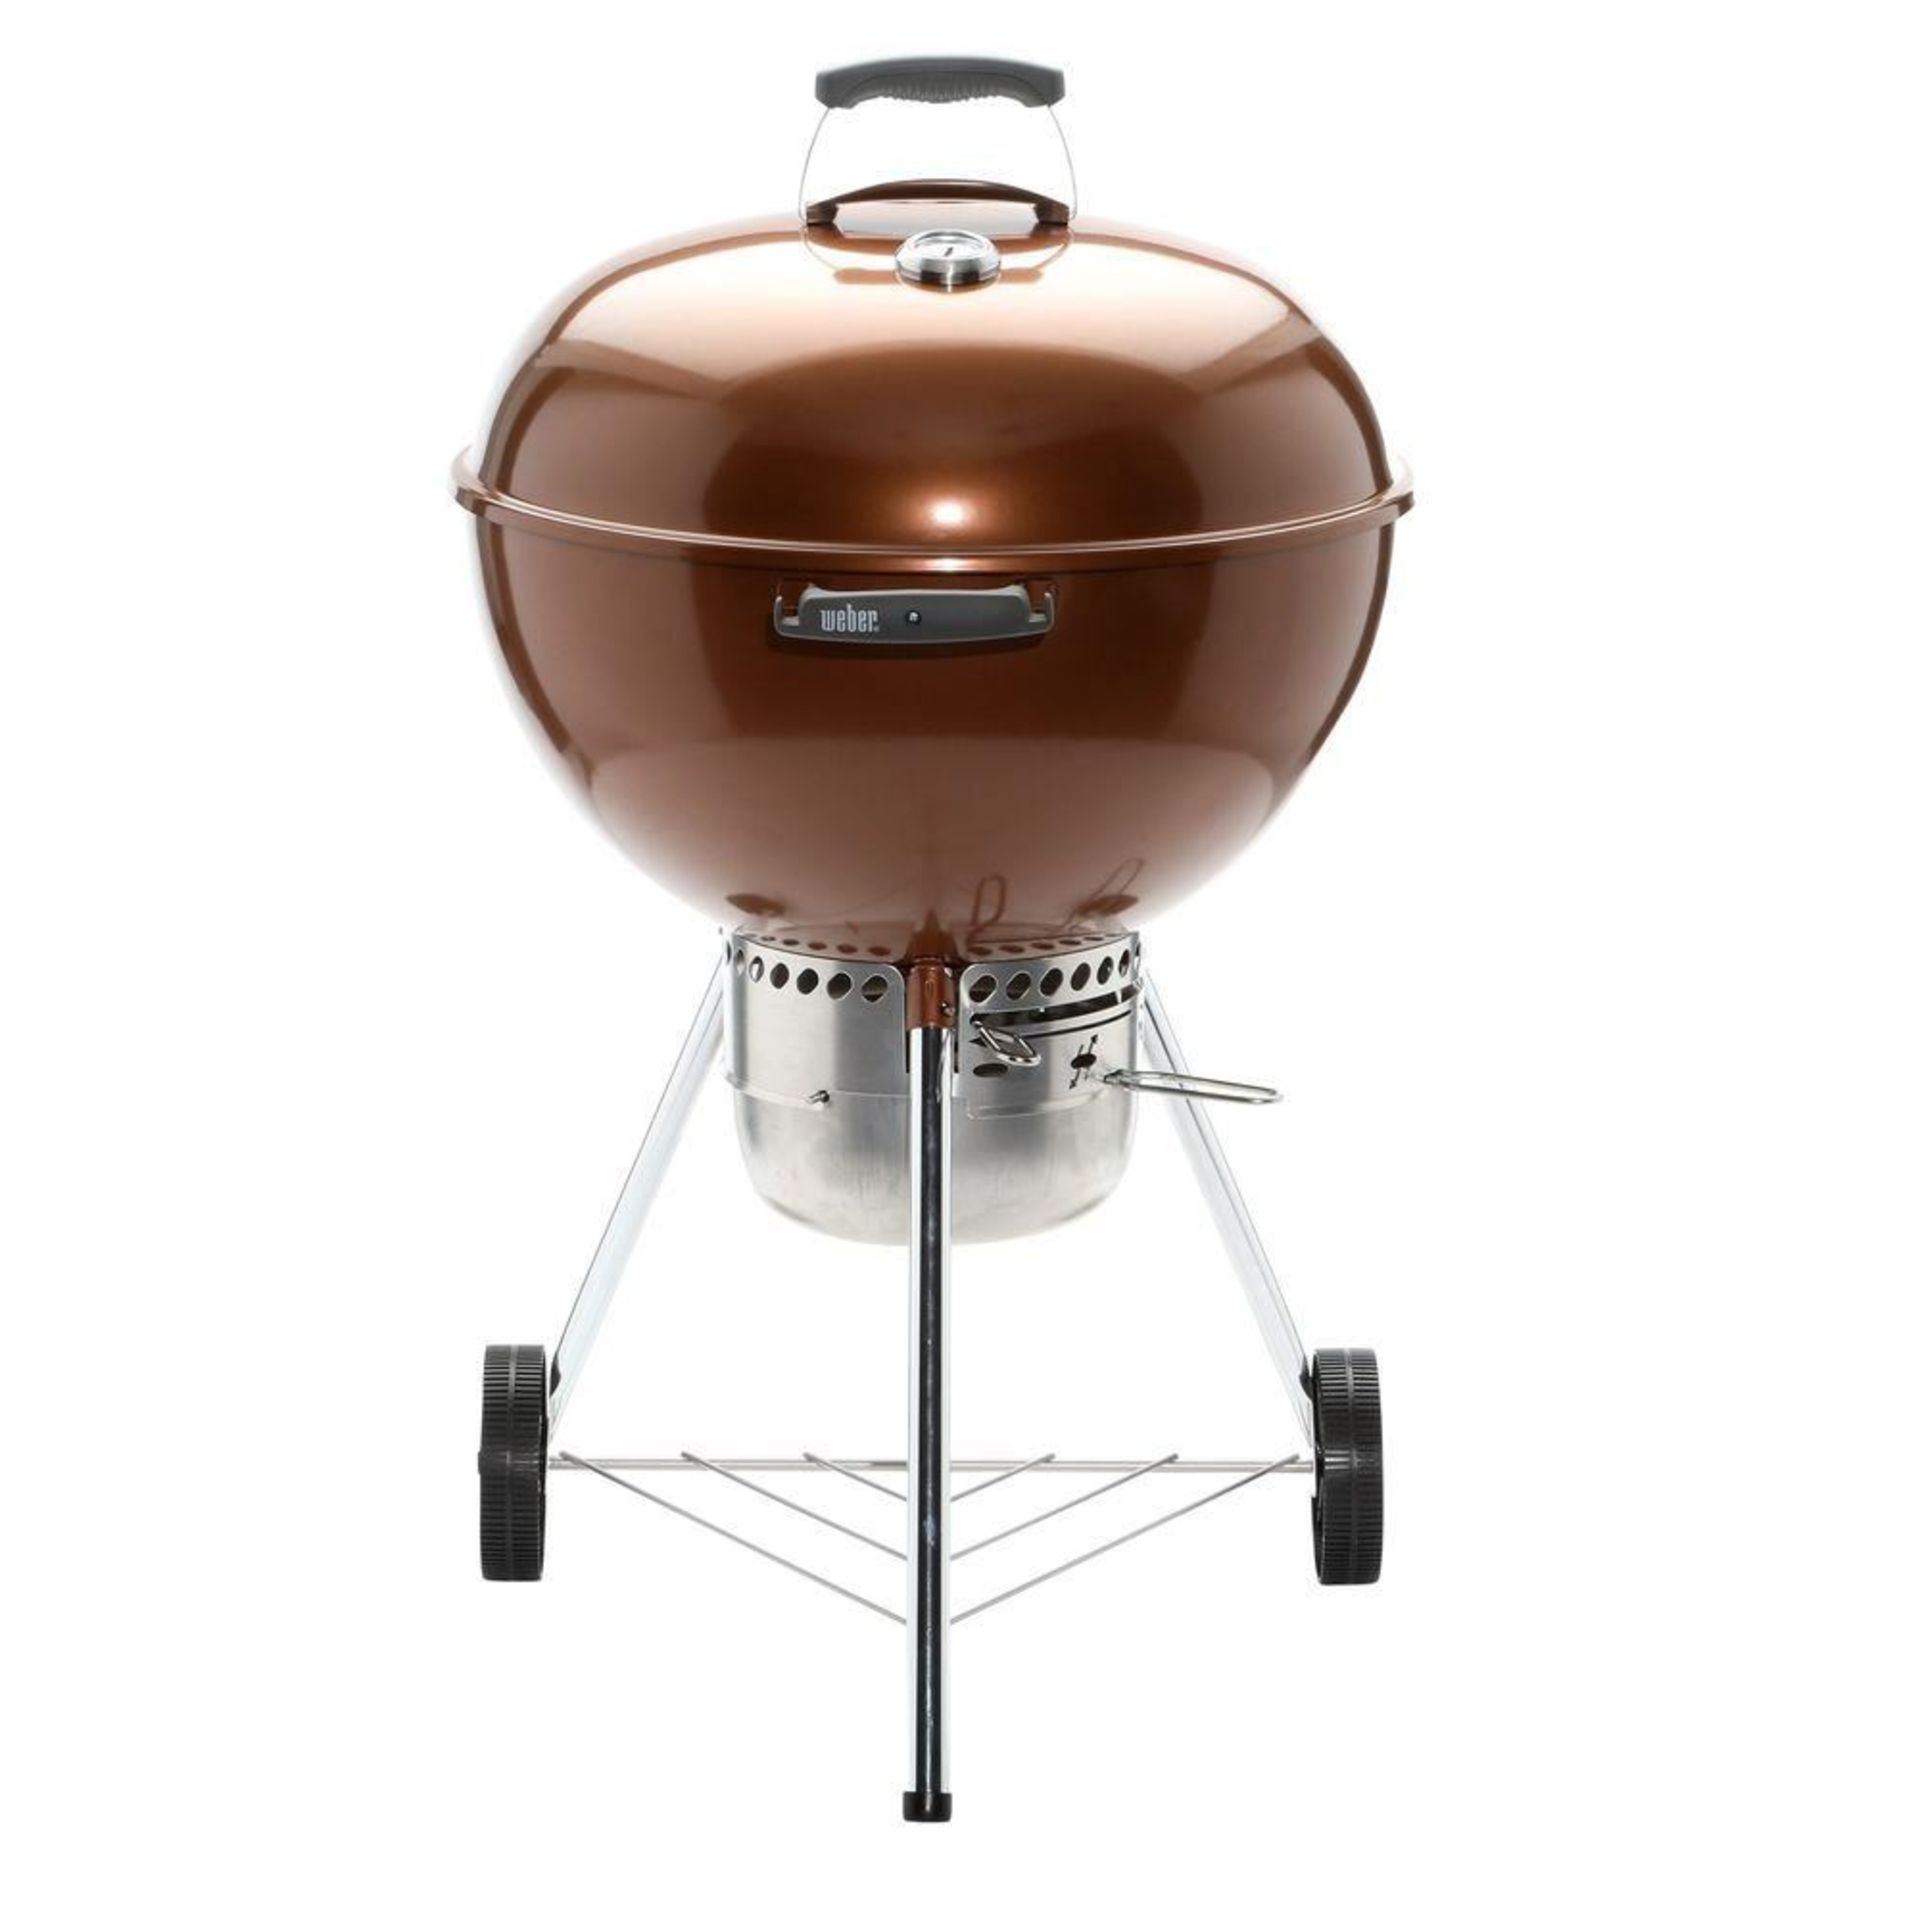 Weber 22 inch Premium Original Kettle Charcoal Grill in Copper with Built-In Thermometer